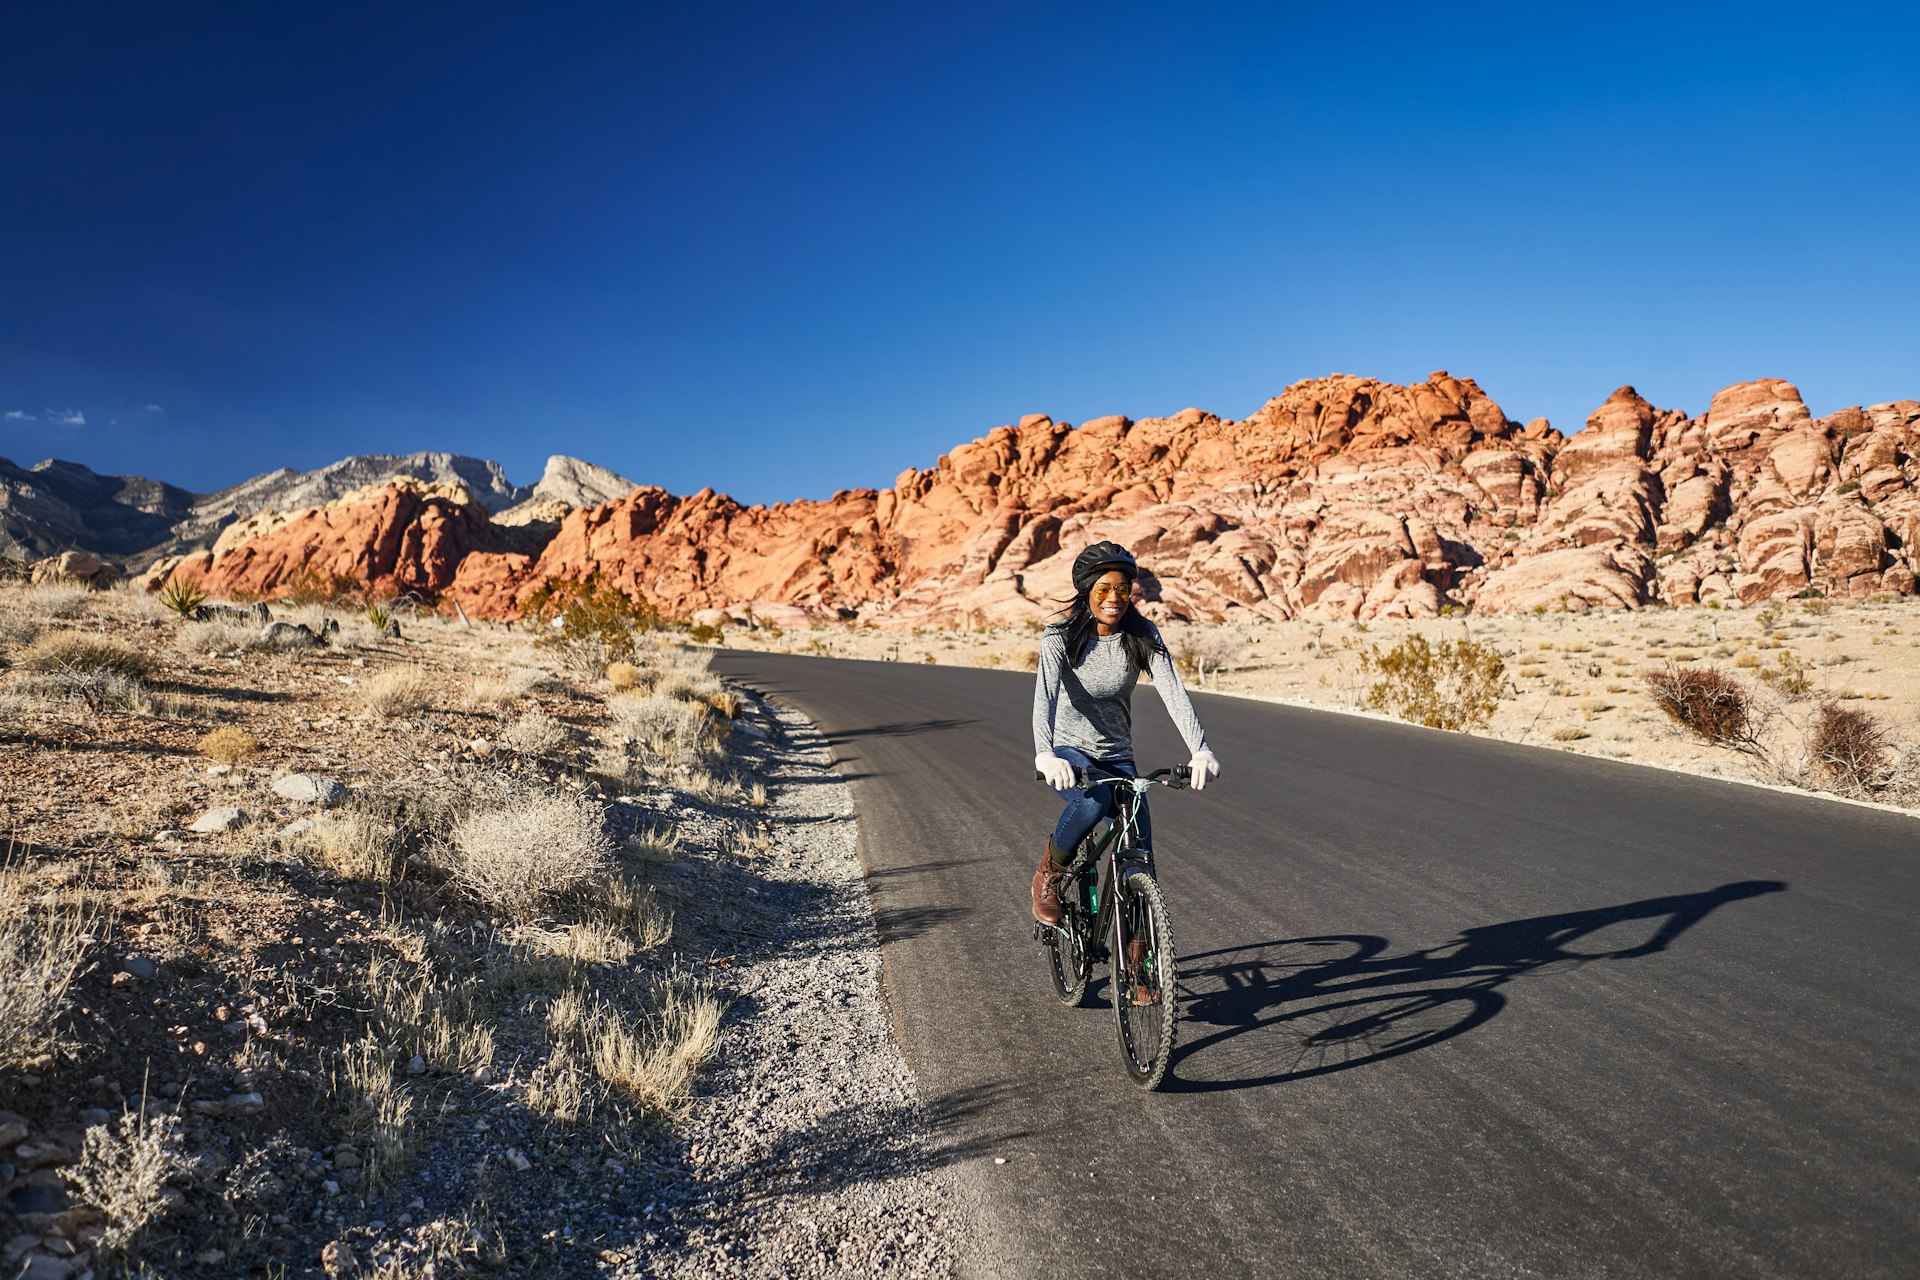 A woman cycling on a paved road through a desert landscape